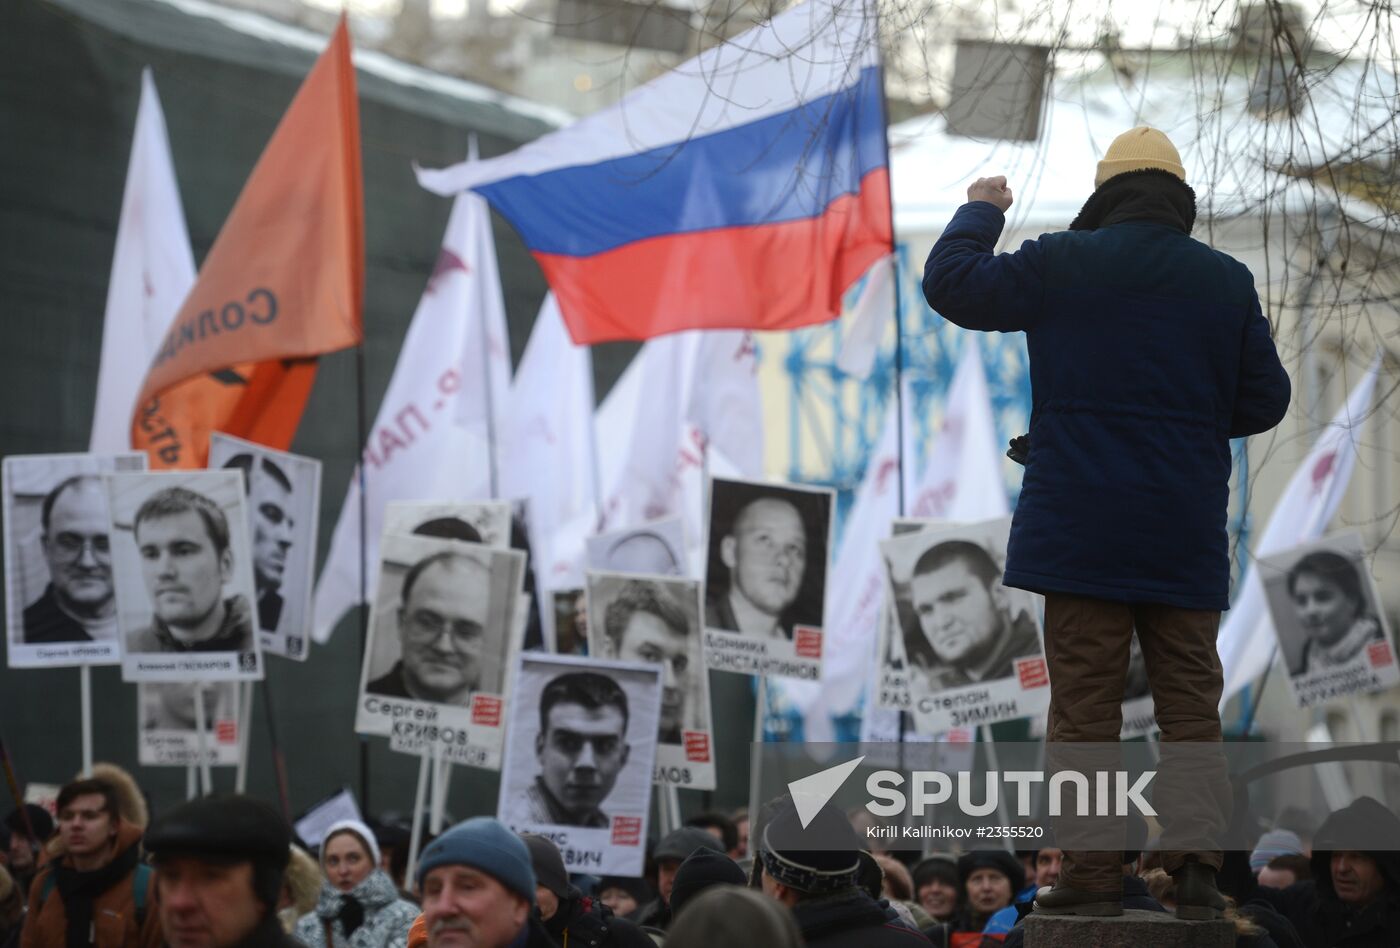 March for Freedom staged in Moscow